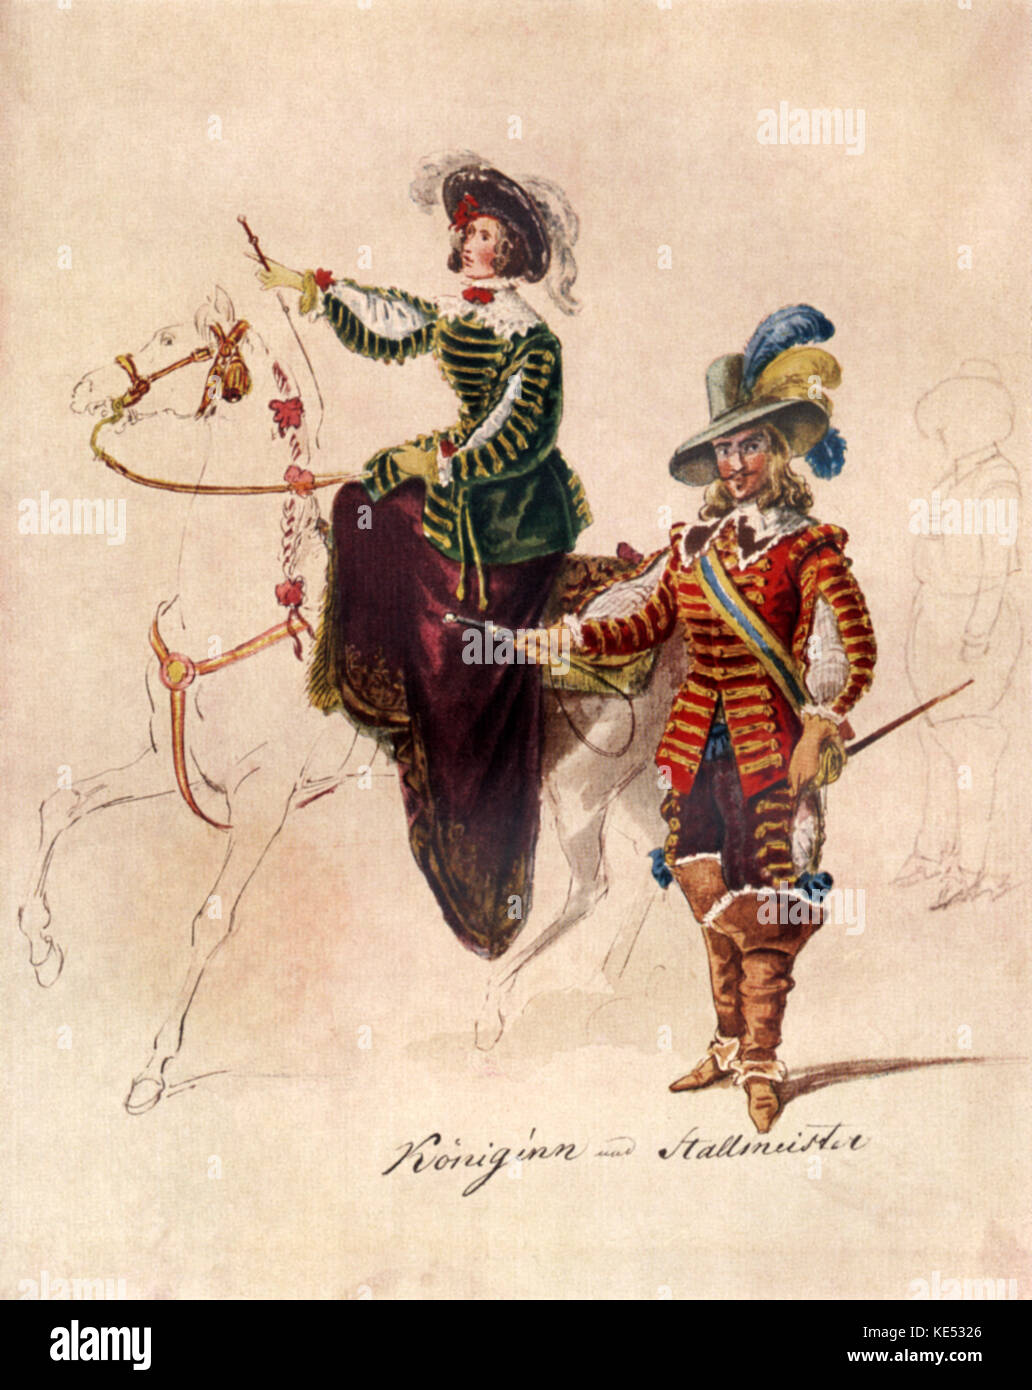 Giacomo Meyerbeer 's opera   'Anglikaner und Puritaner'. Costume design for Munich opera production. Drawing of costumes for Queen and Hallmesiters. German- French composer named Jakob Liebmann Meyer Beer, 5 September 1791 - 2 May 1864. Stock Photo